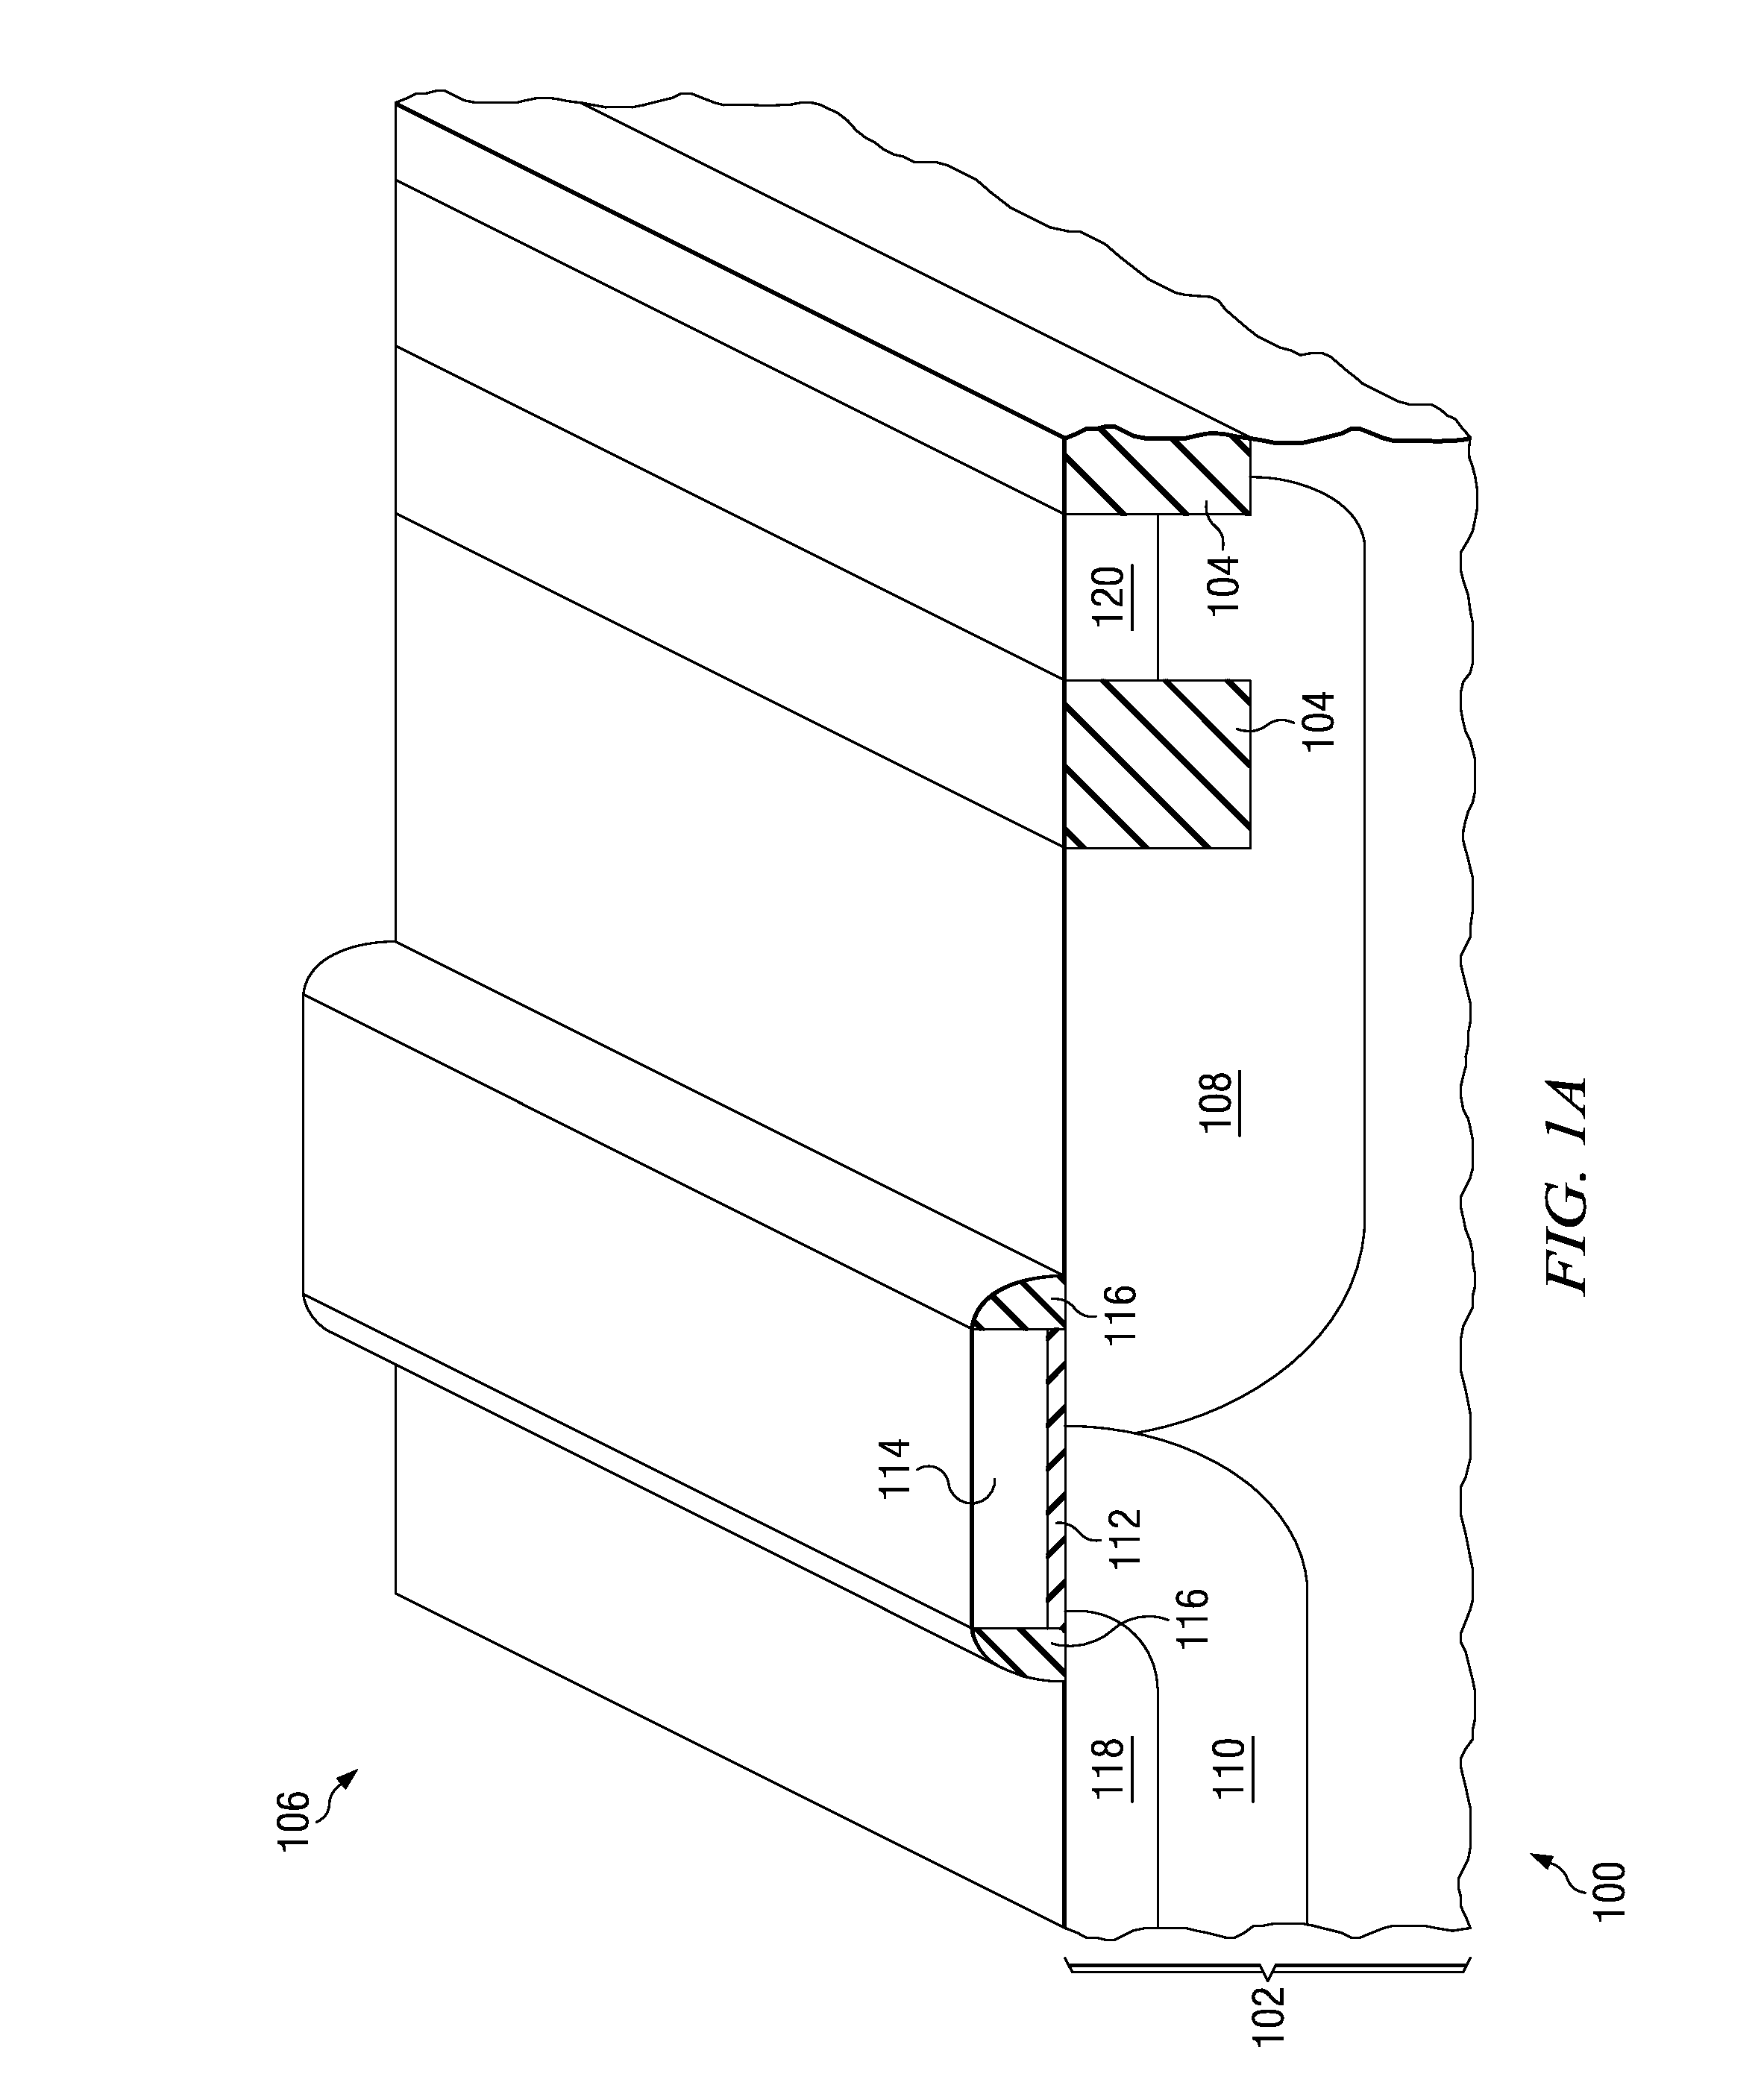 Monolithically integrated active snubber